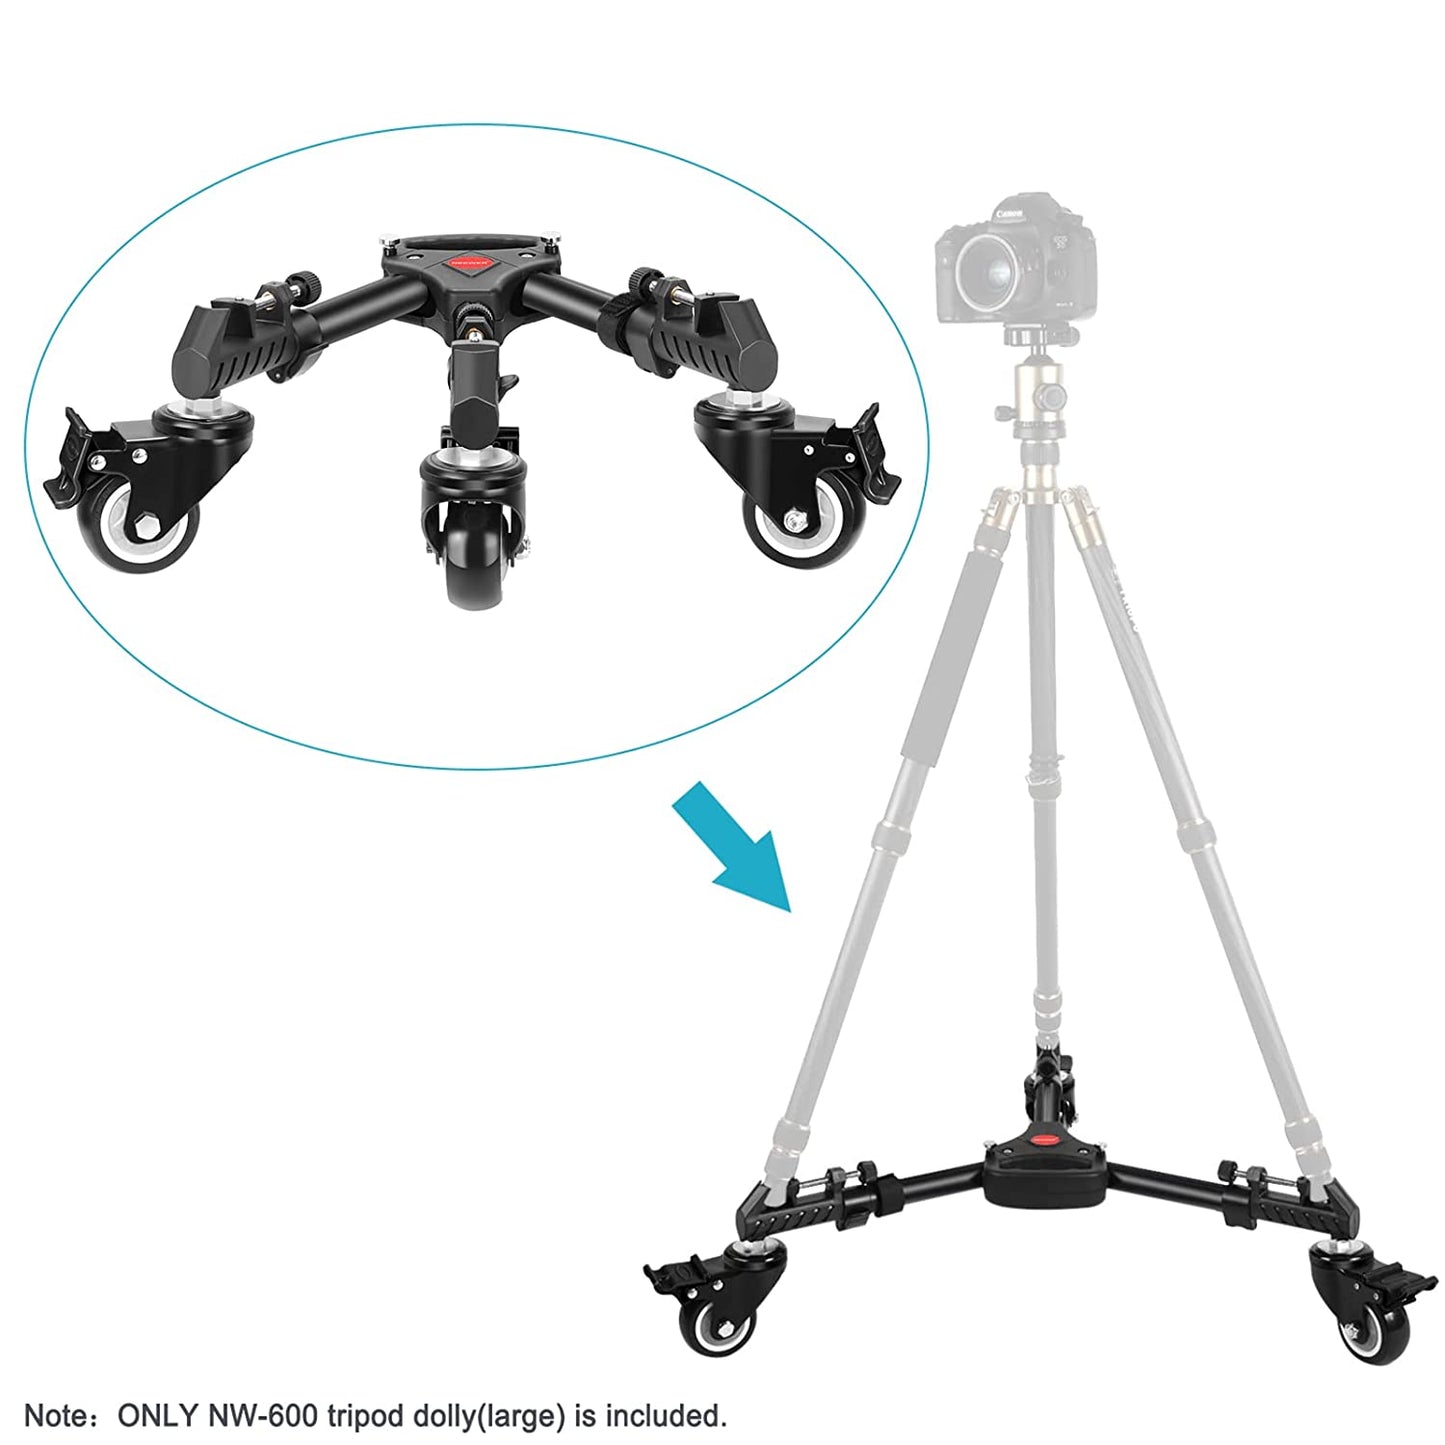 Neewer Photography Professional Heavy Duty Tripod Dolly with Rubber Wheels and Adjustable Leg Mounts for Canon Nikon Sony DSLR Cameras Camcorder Photo Video Lighting